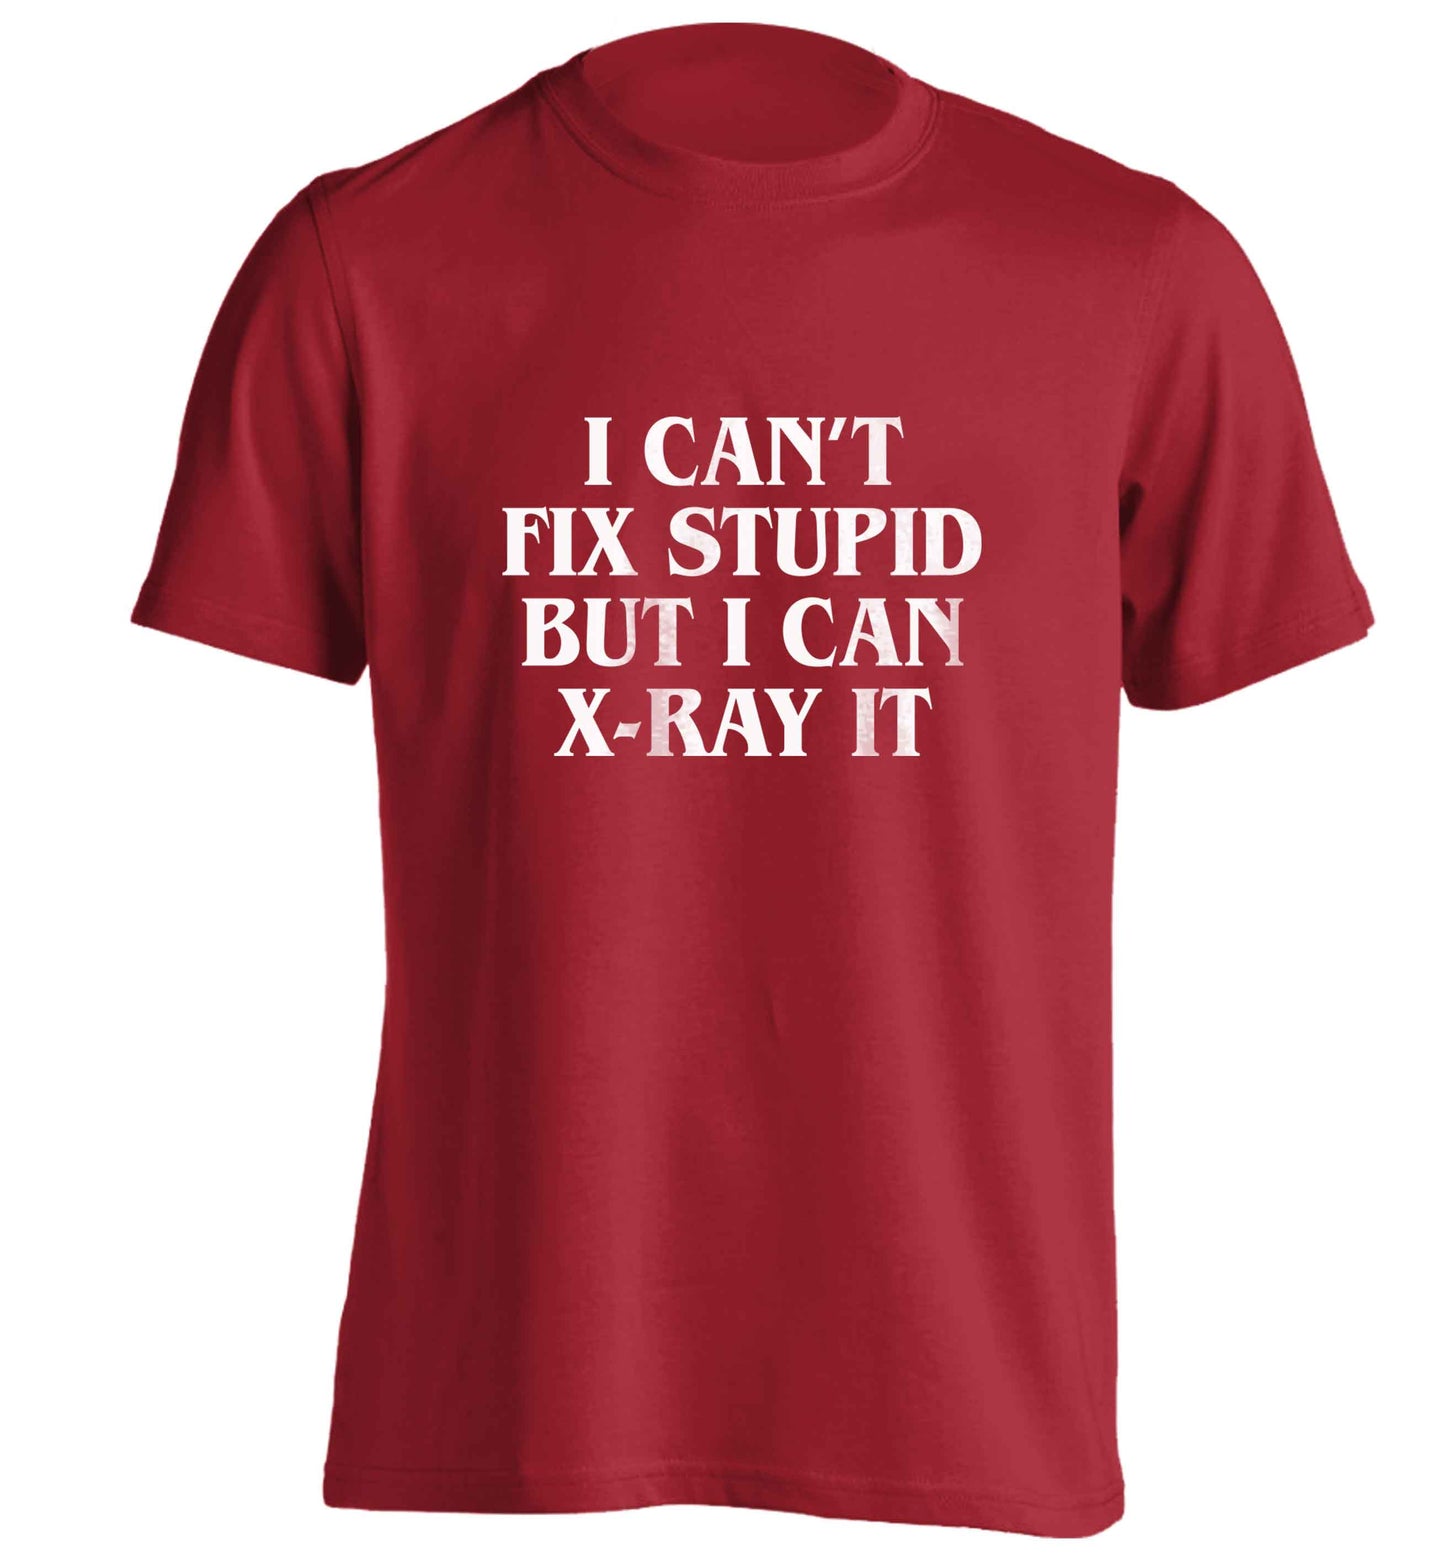 I can't fix stupid but I can X-Ray it adults unisex red Tshirt 2XL